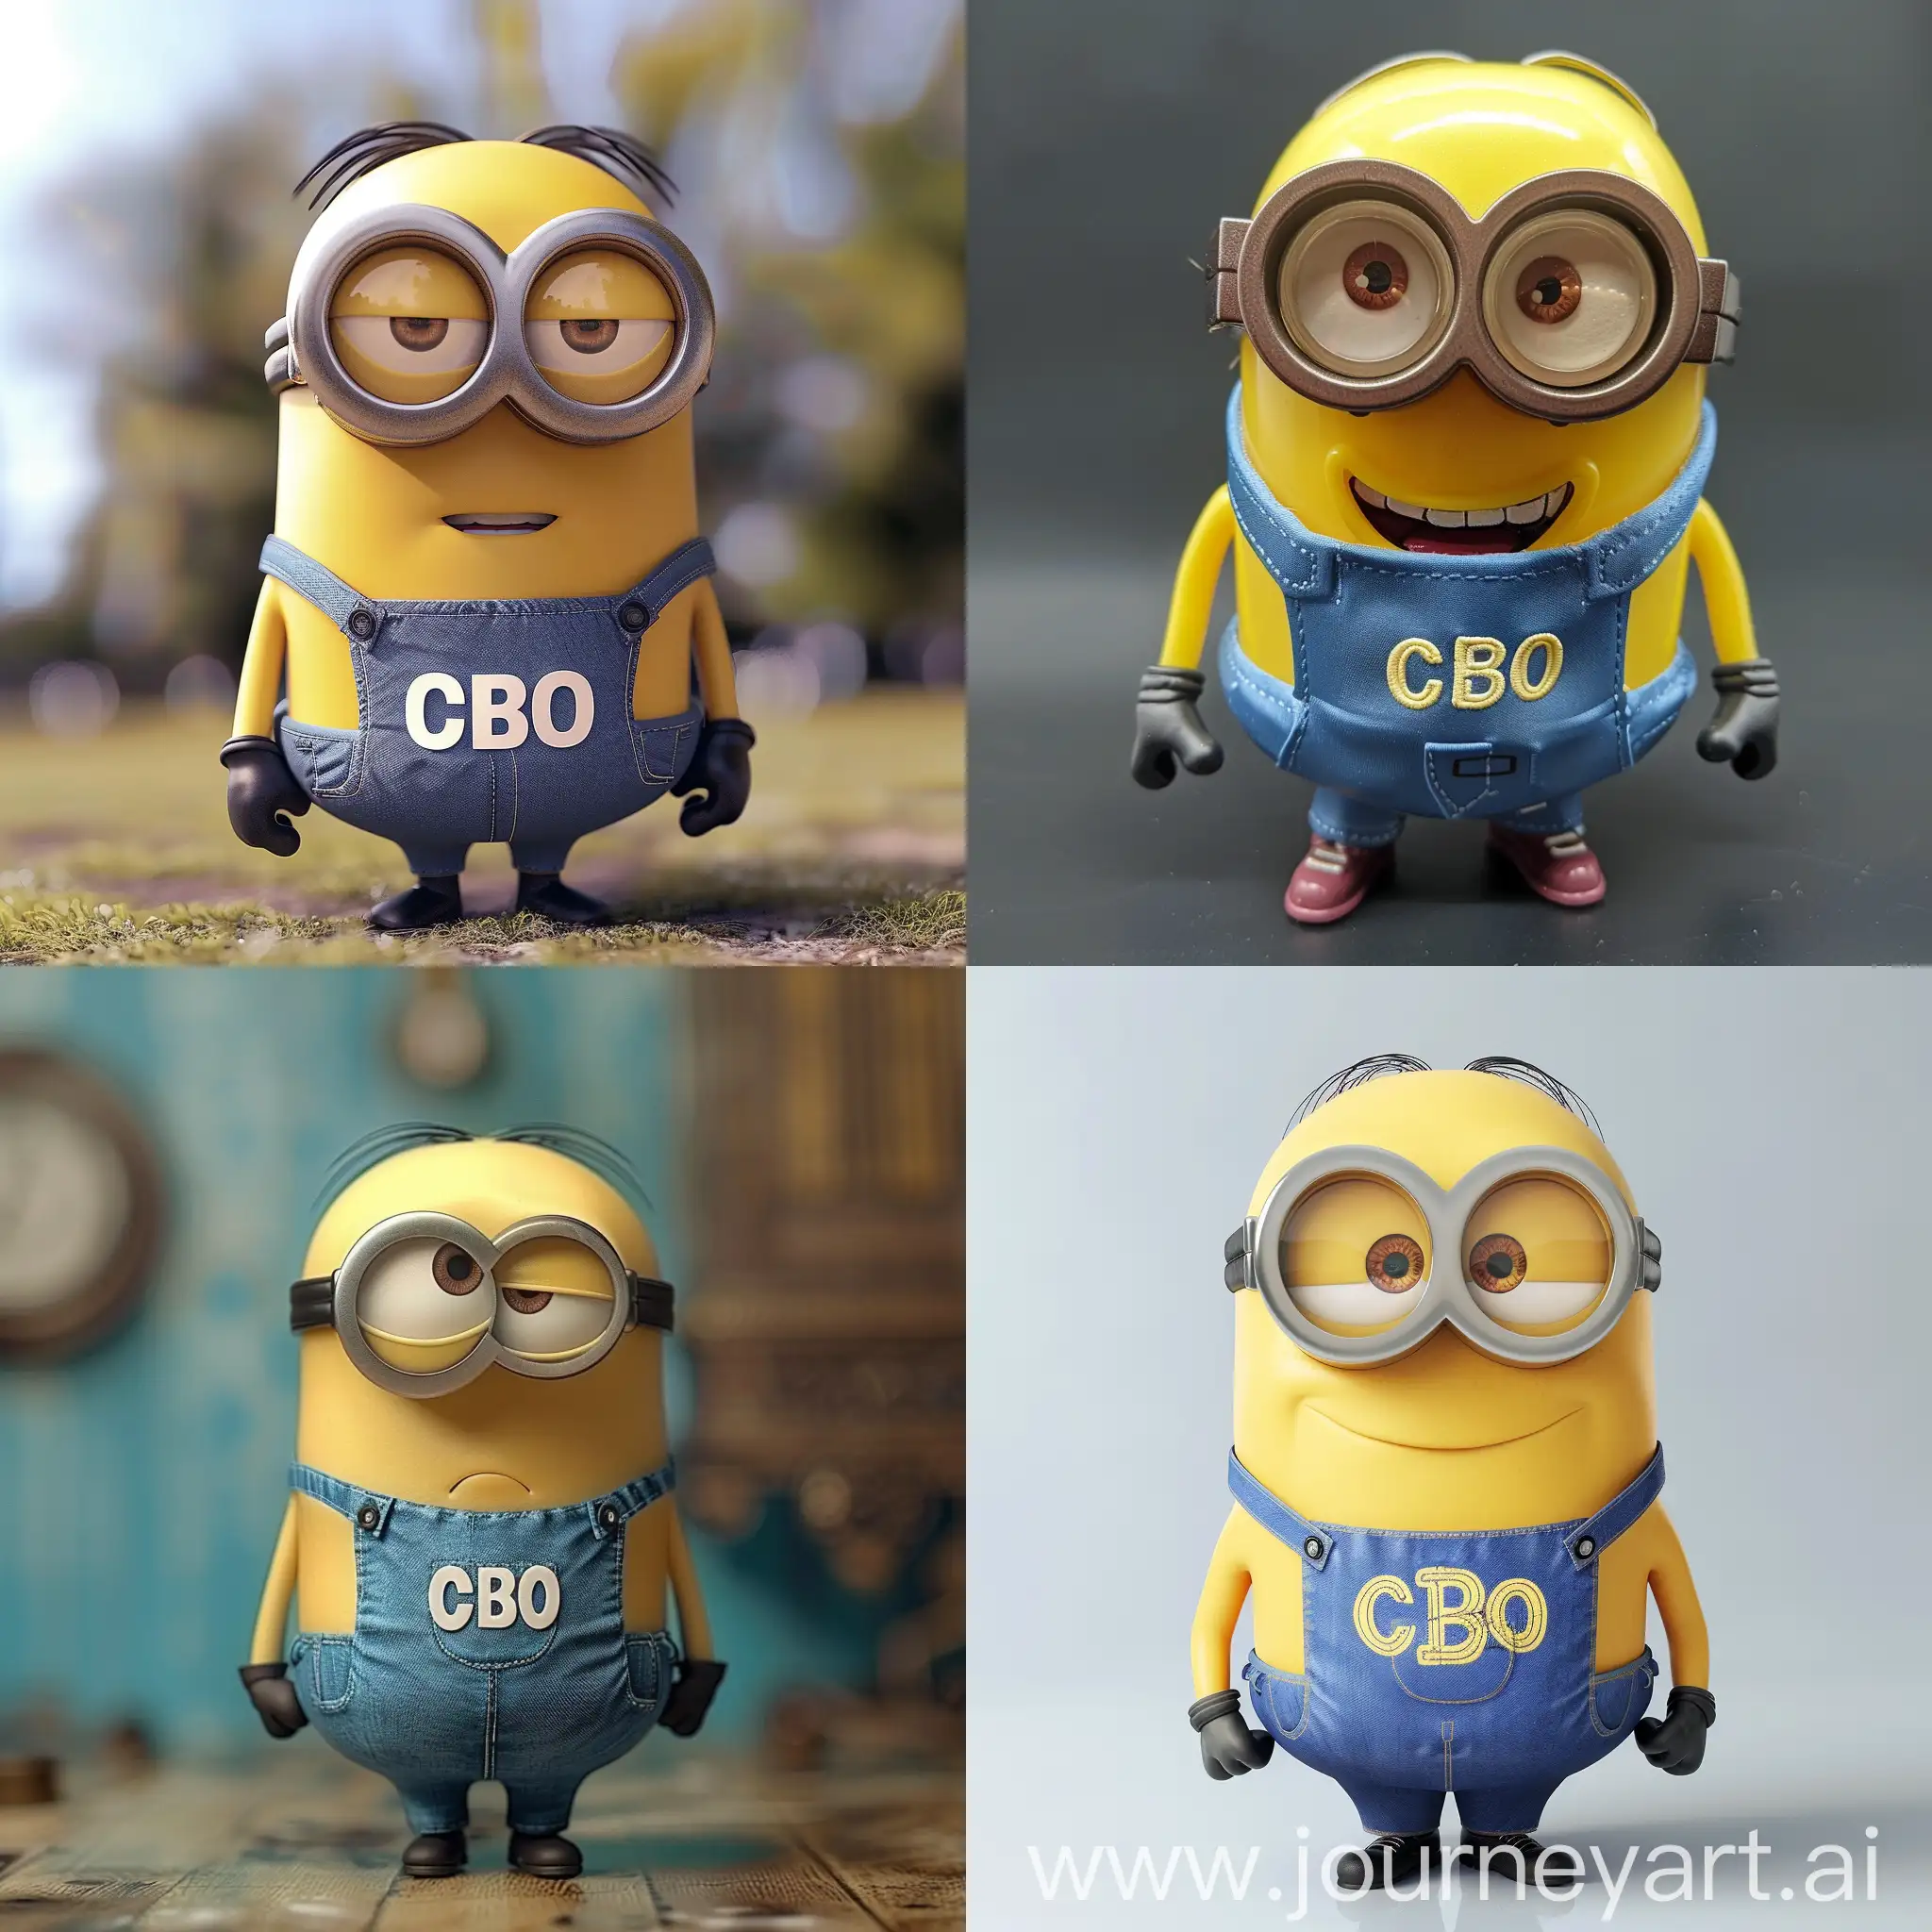 Playful-Minion-Character-with-CBO-Tshirt